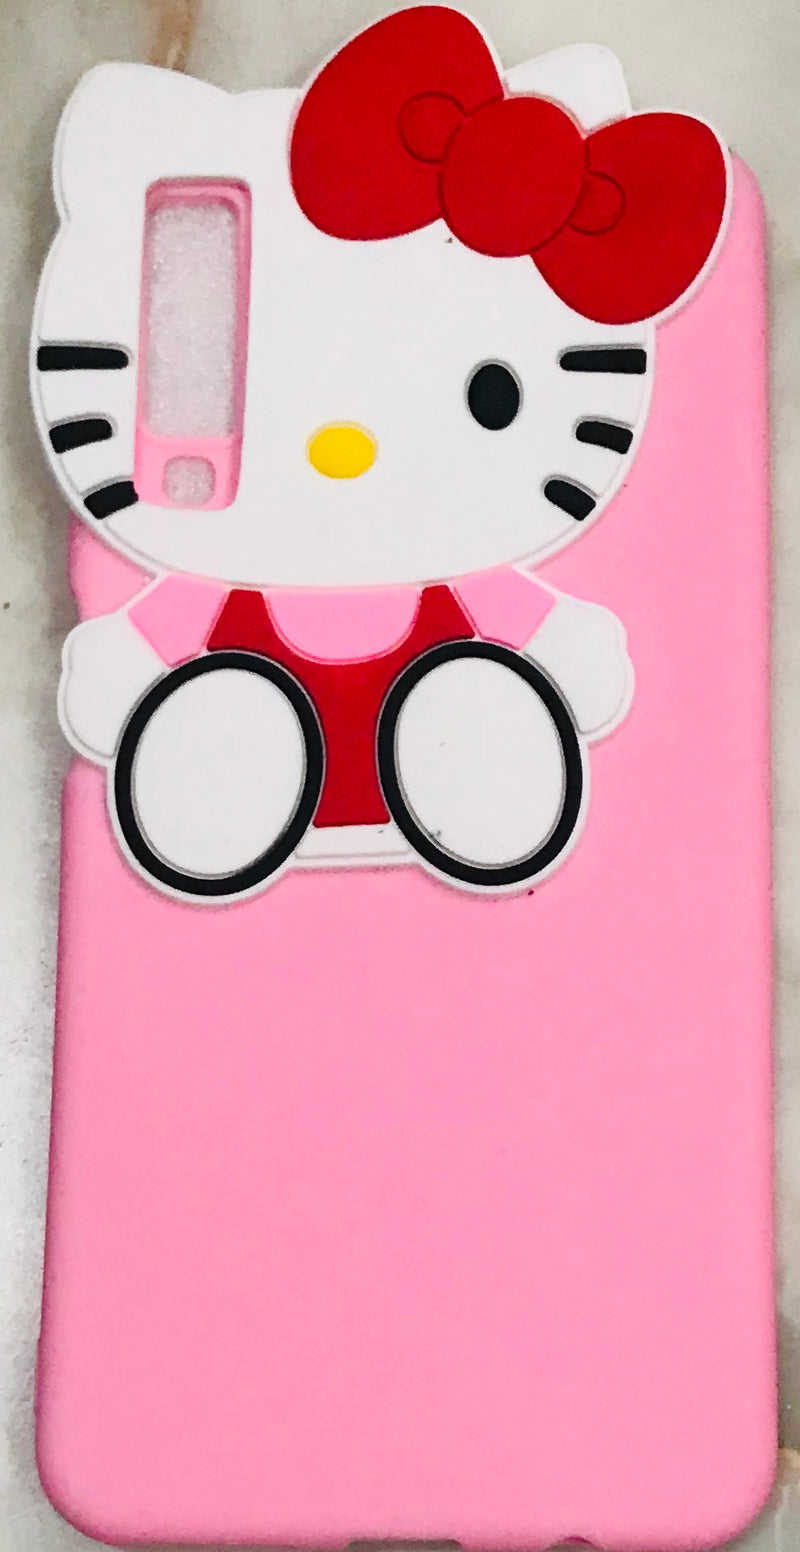 Girl's Back Cover Hello Kitty Silicon for Samsung A7 2018 - AHFK00830004FKSSA7C